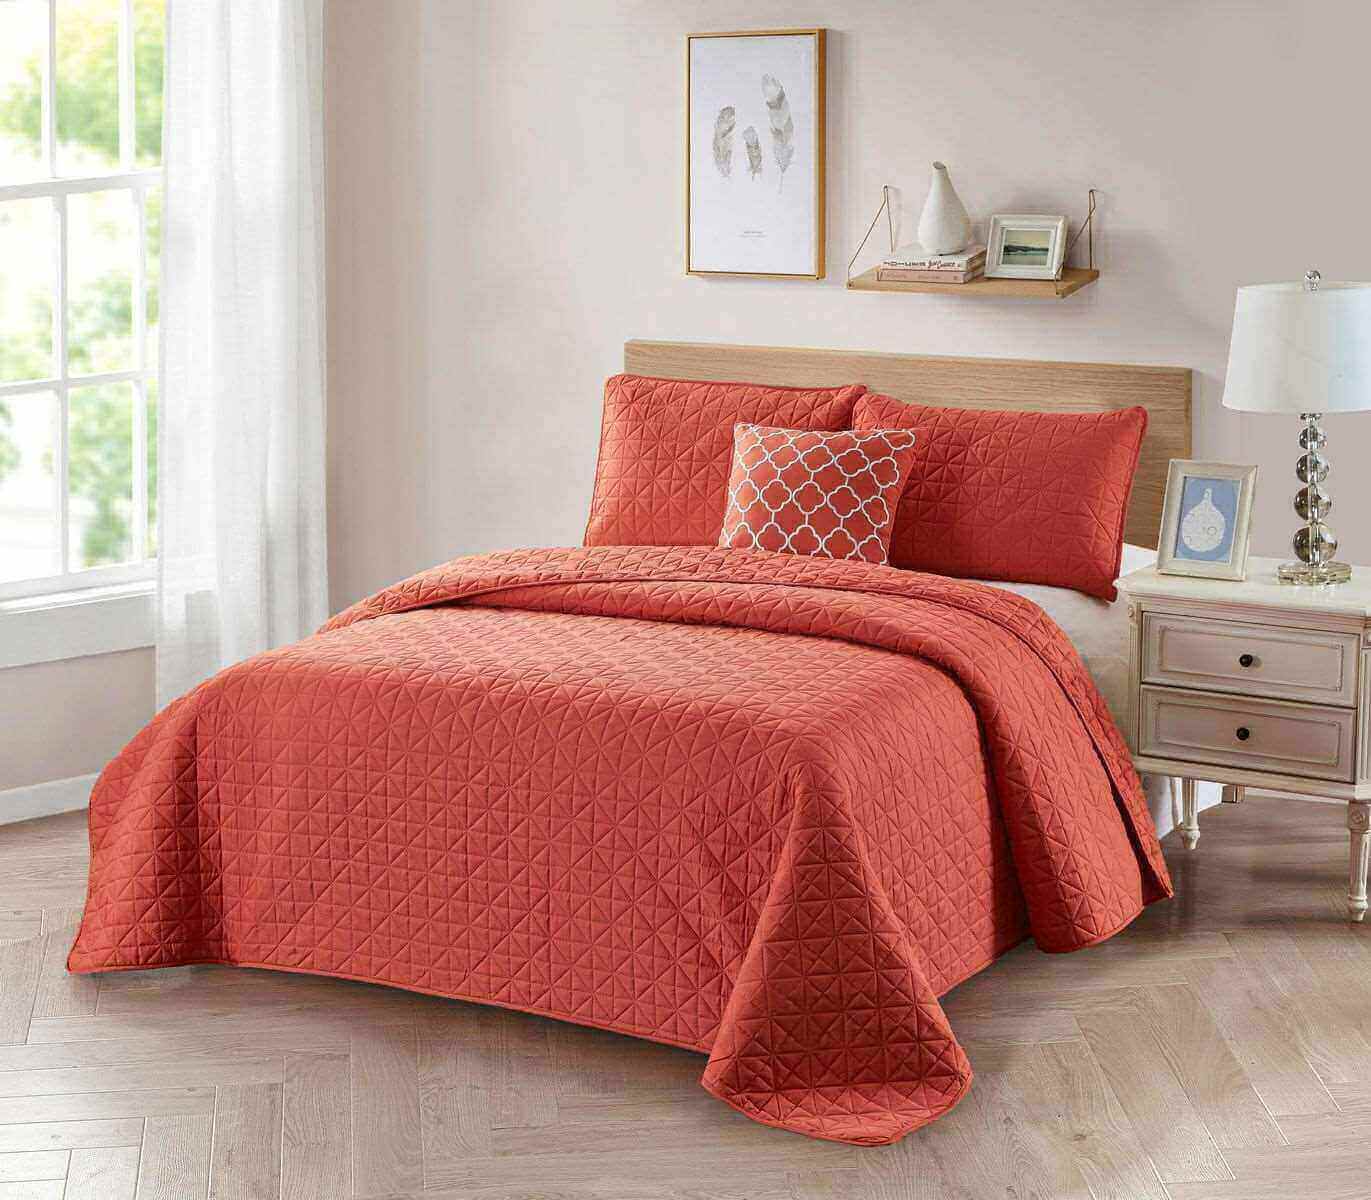 Bibb Home 4 Piece Solid Quilt Set with Cushion in coral